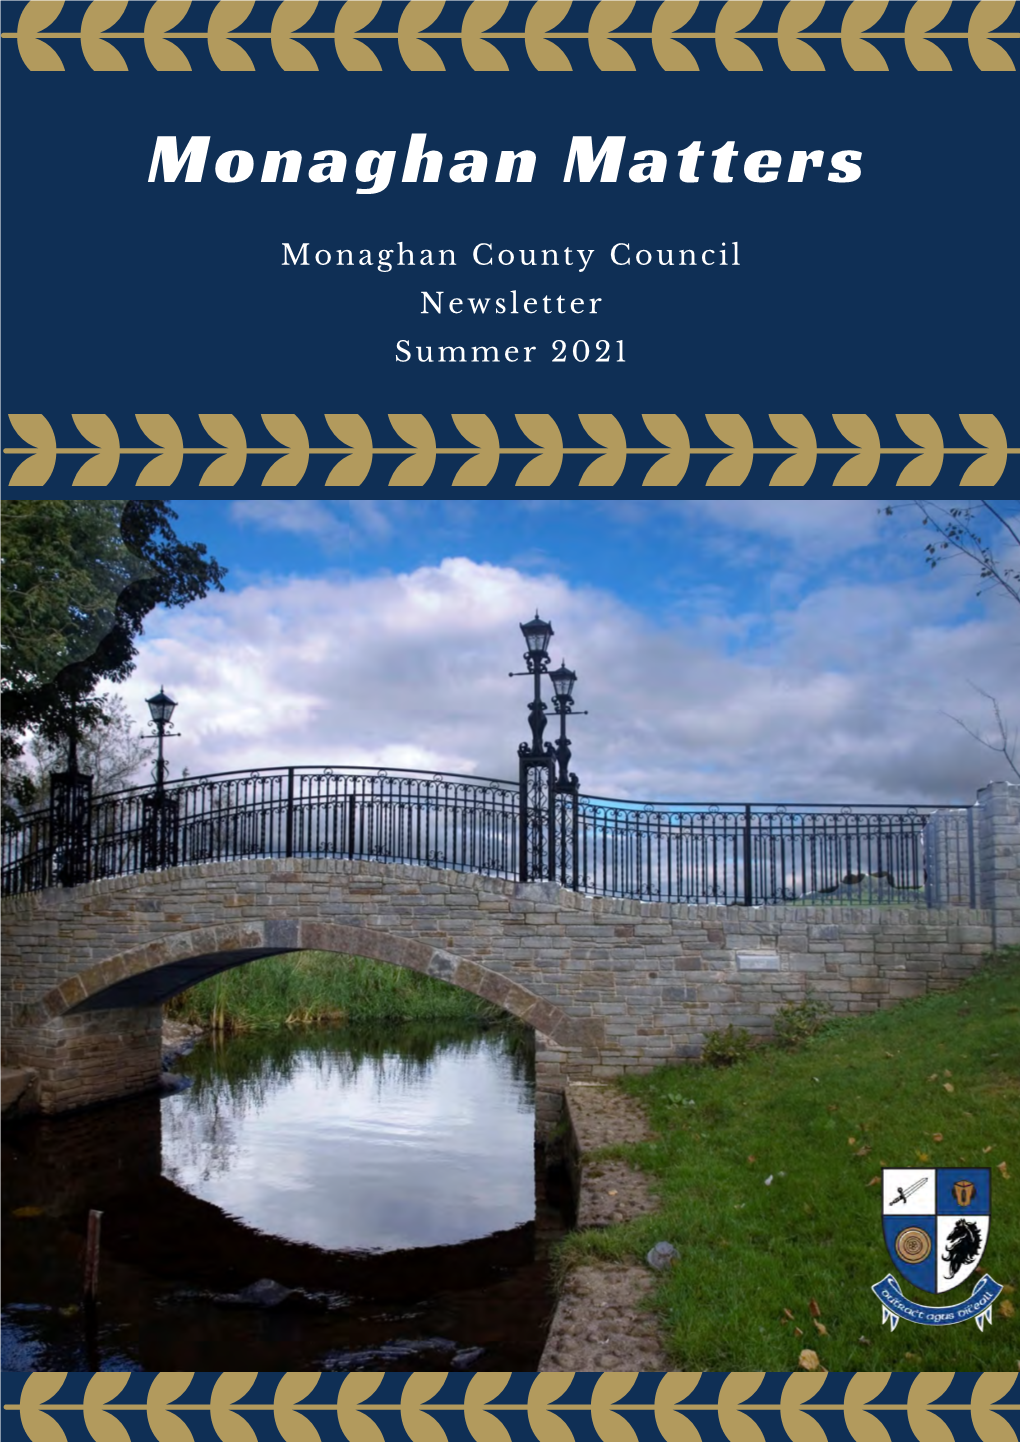 Monaghan County Council Newsletter Summer 2021 (PDF)